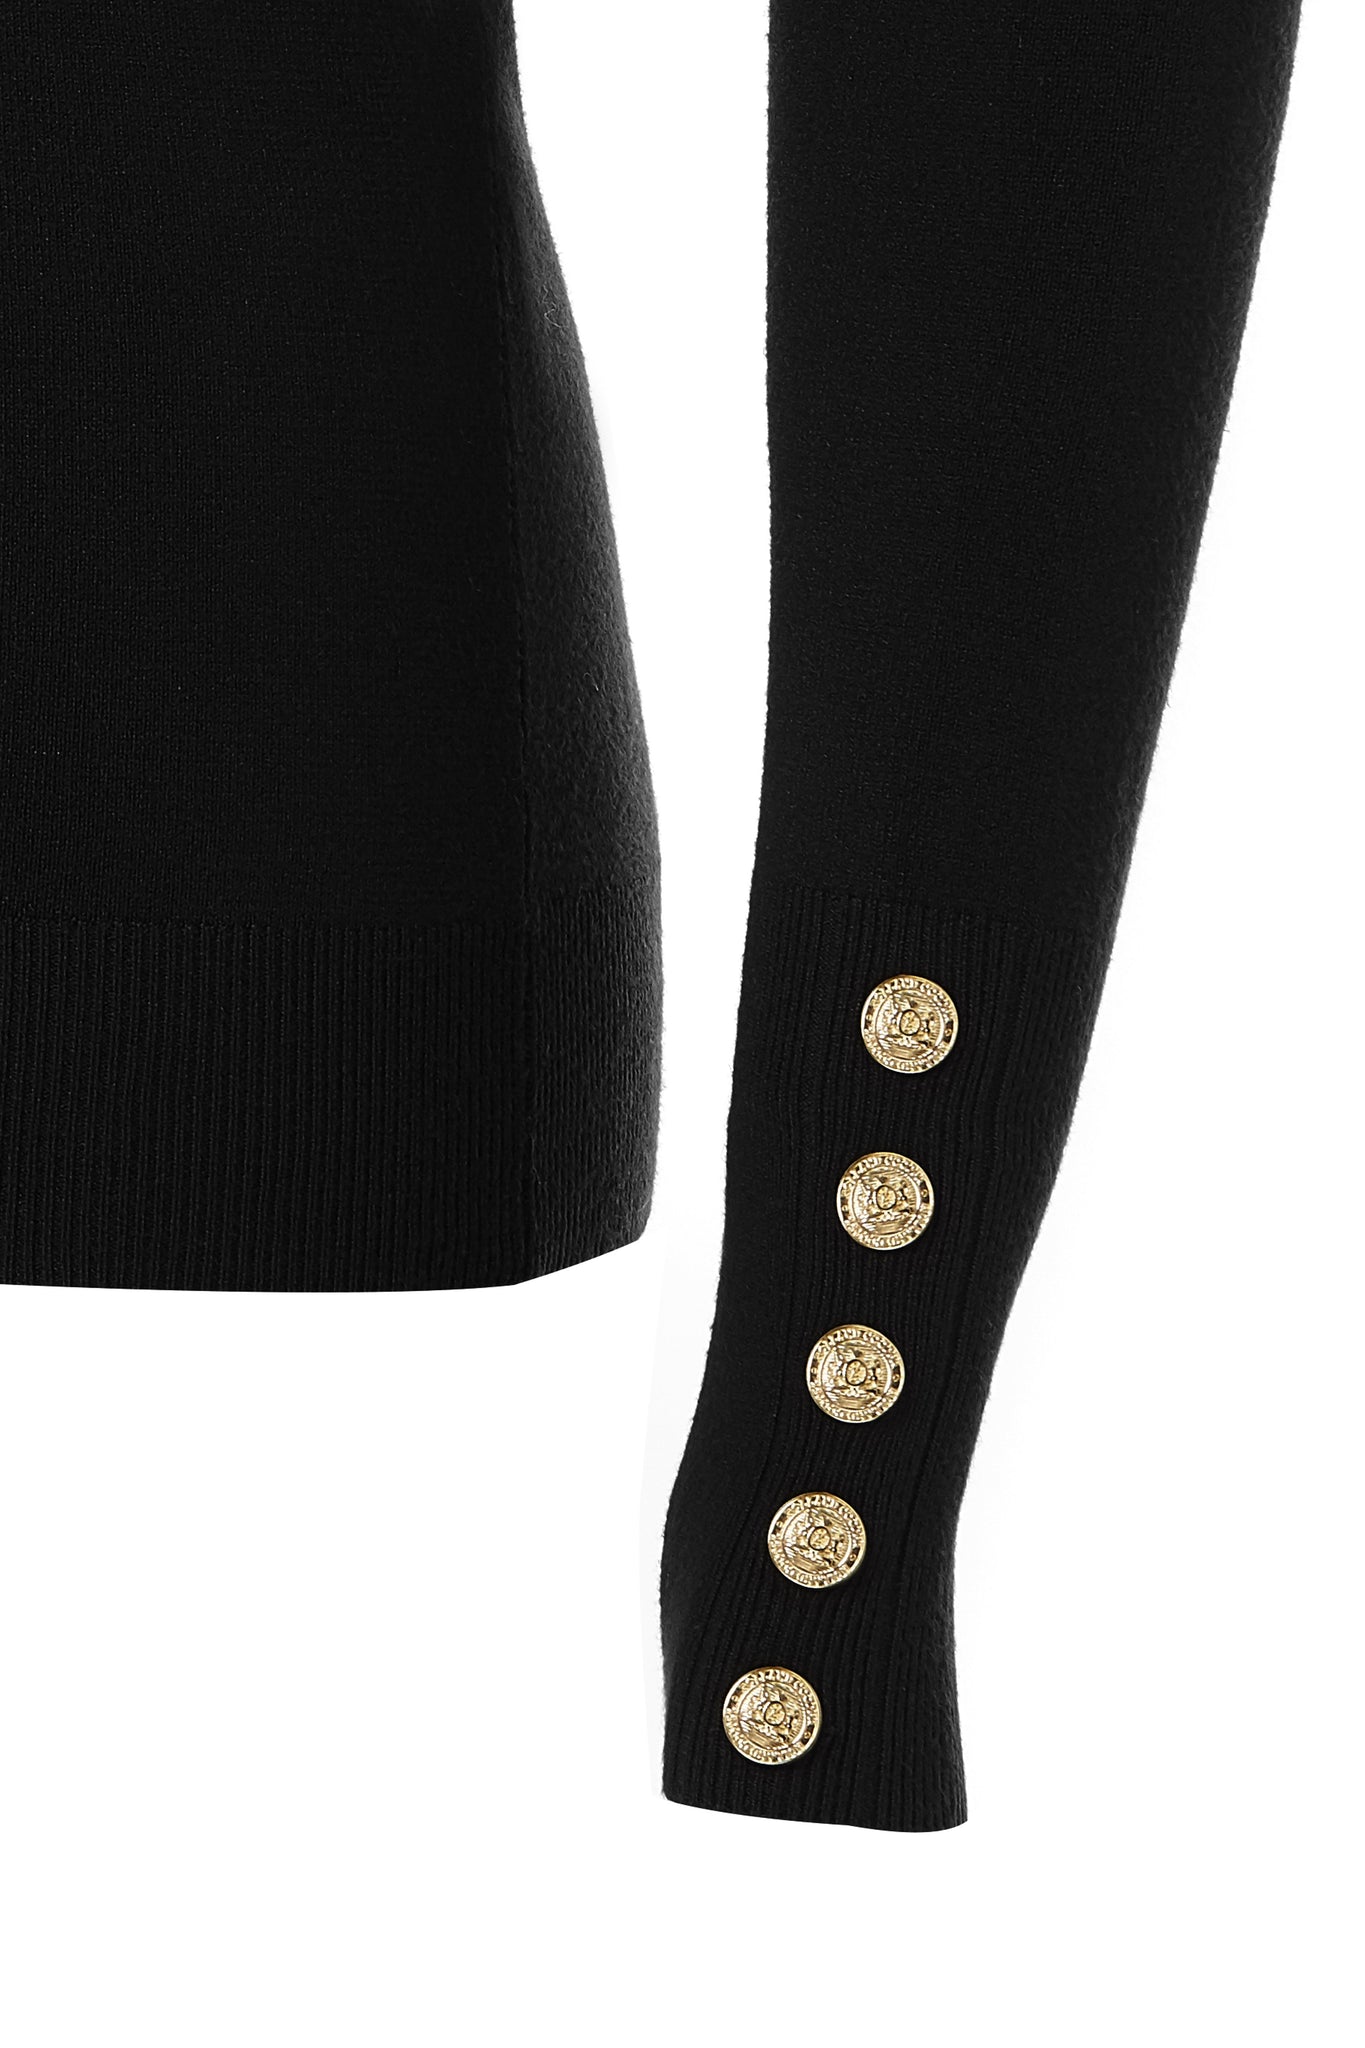 gold button detail of cuffs of super soft lightweight jumper in black with ribbed roll neck collar, cuffs and hem